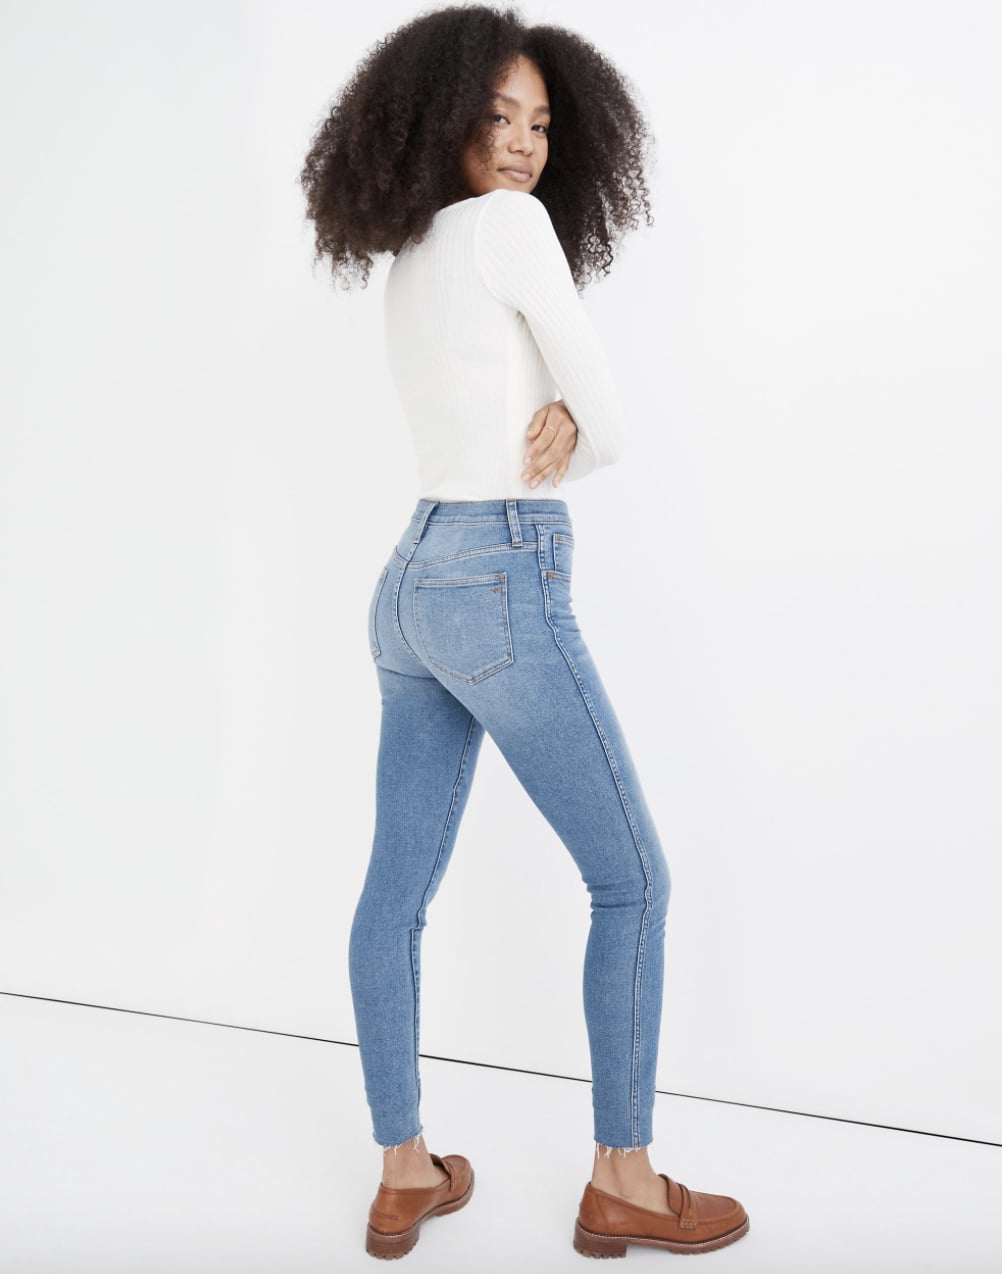 Best Jeans For All Women Guide | Fashion